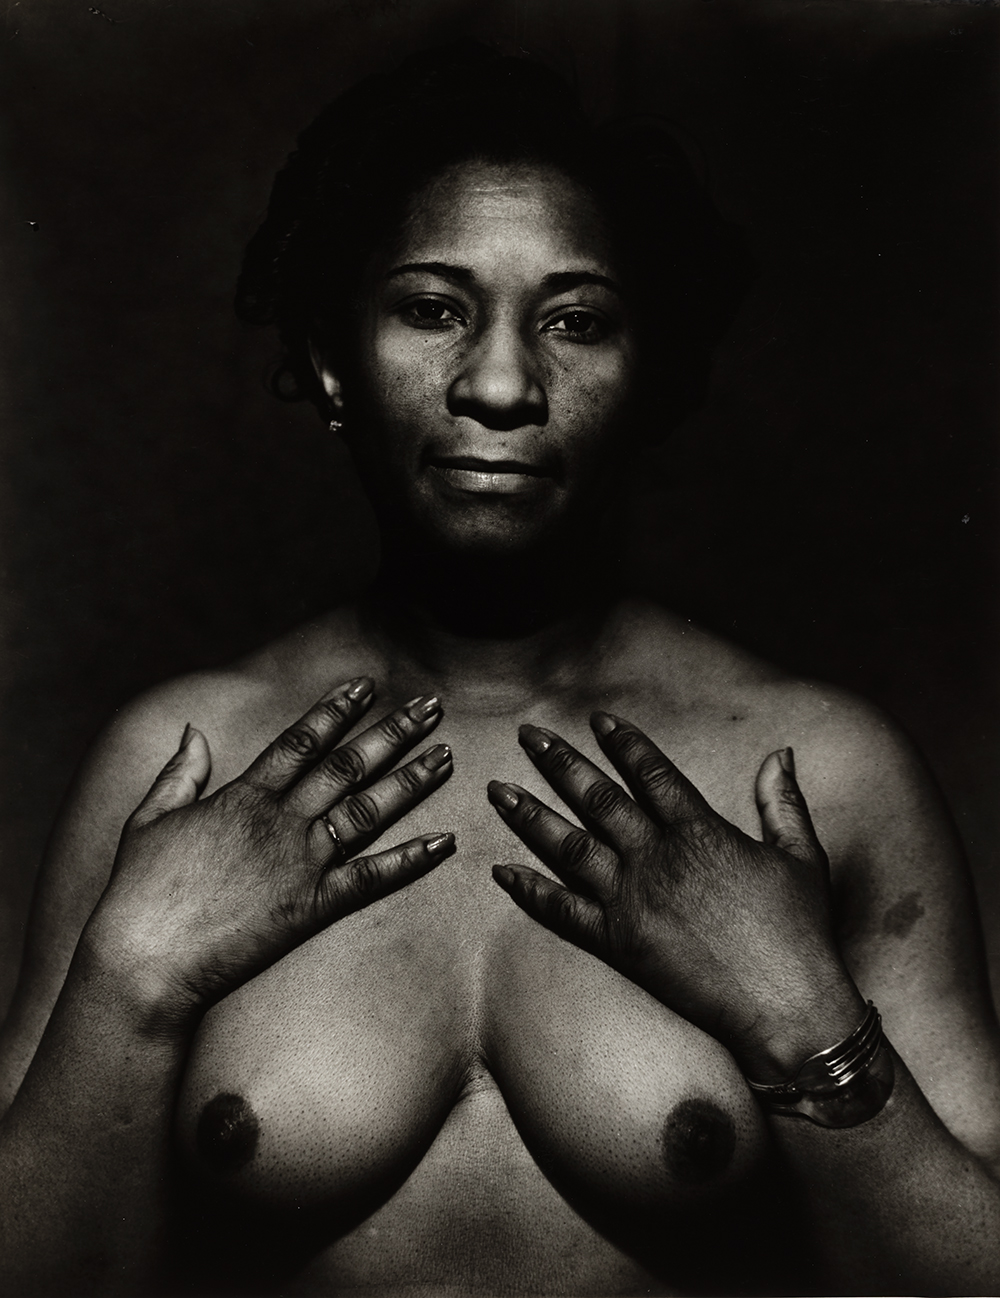 Photograph of a nude Black woman shown from the waist up facing the viewer ...